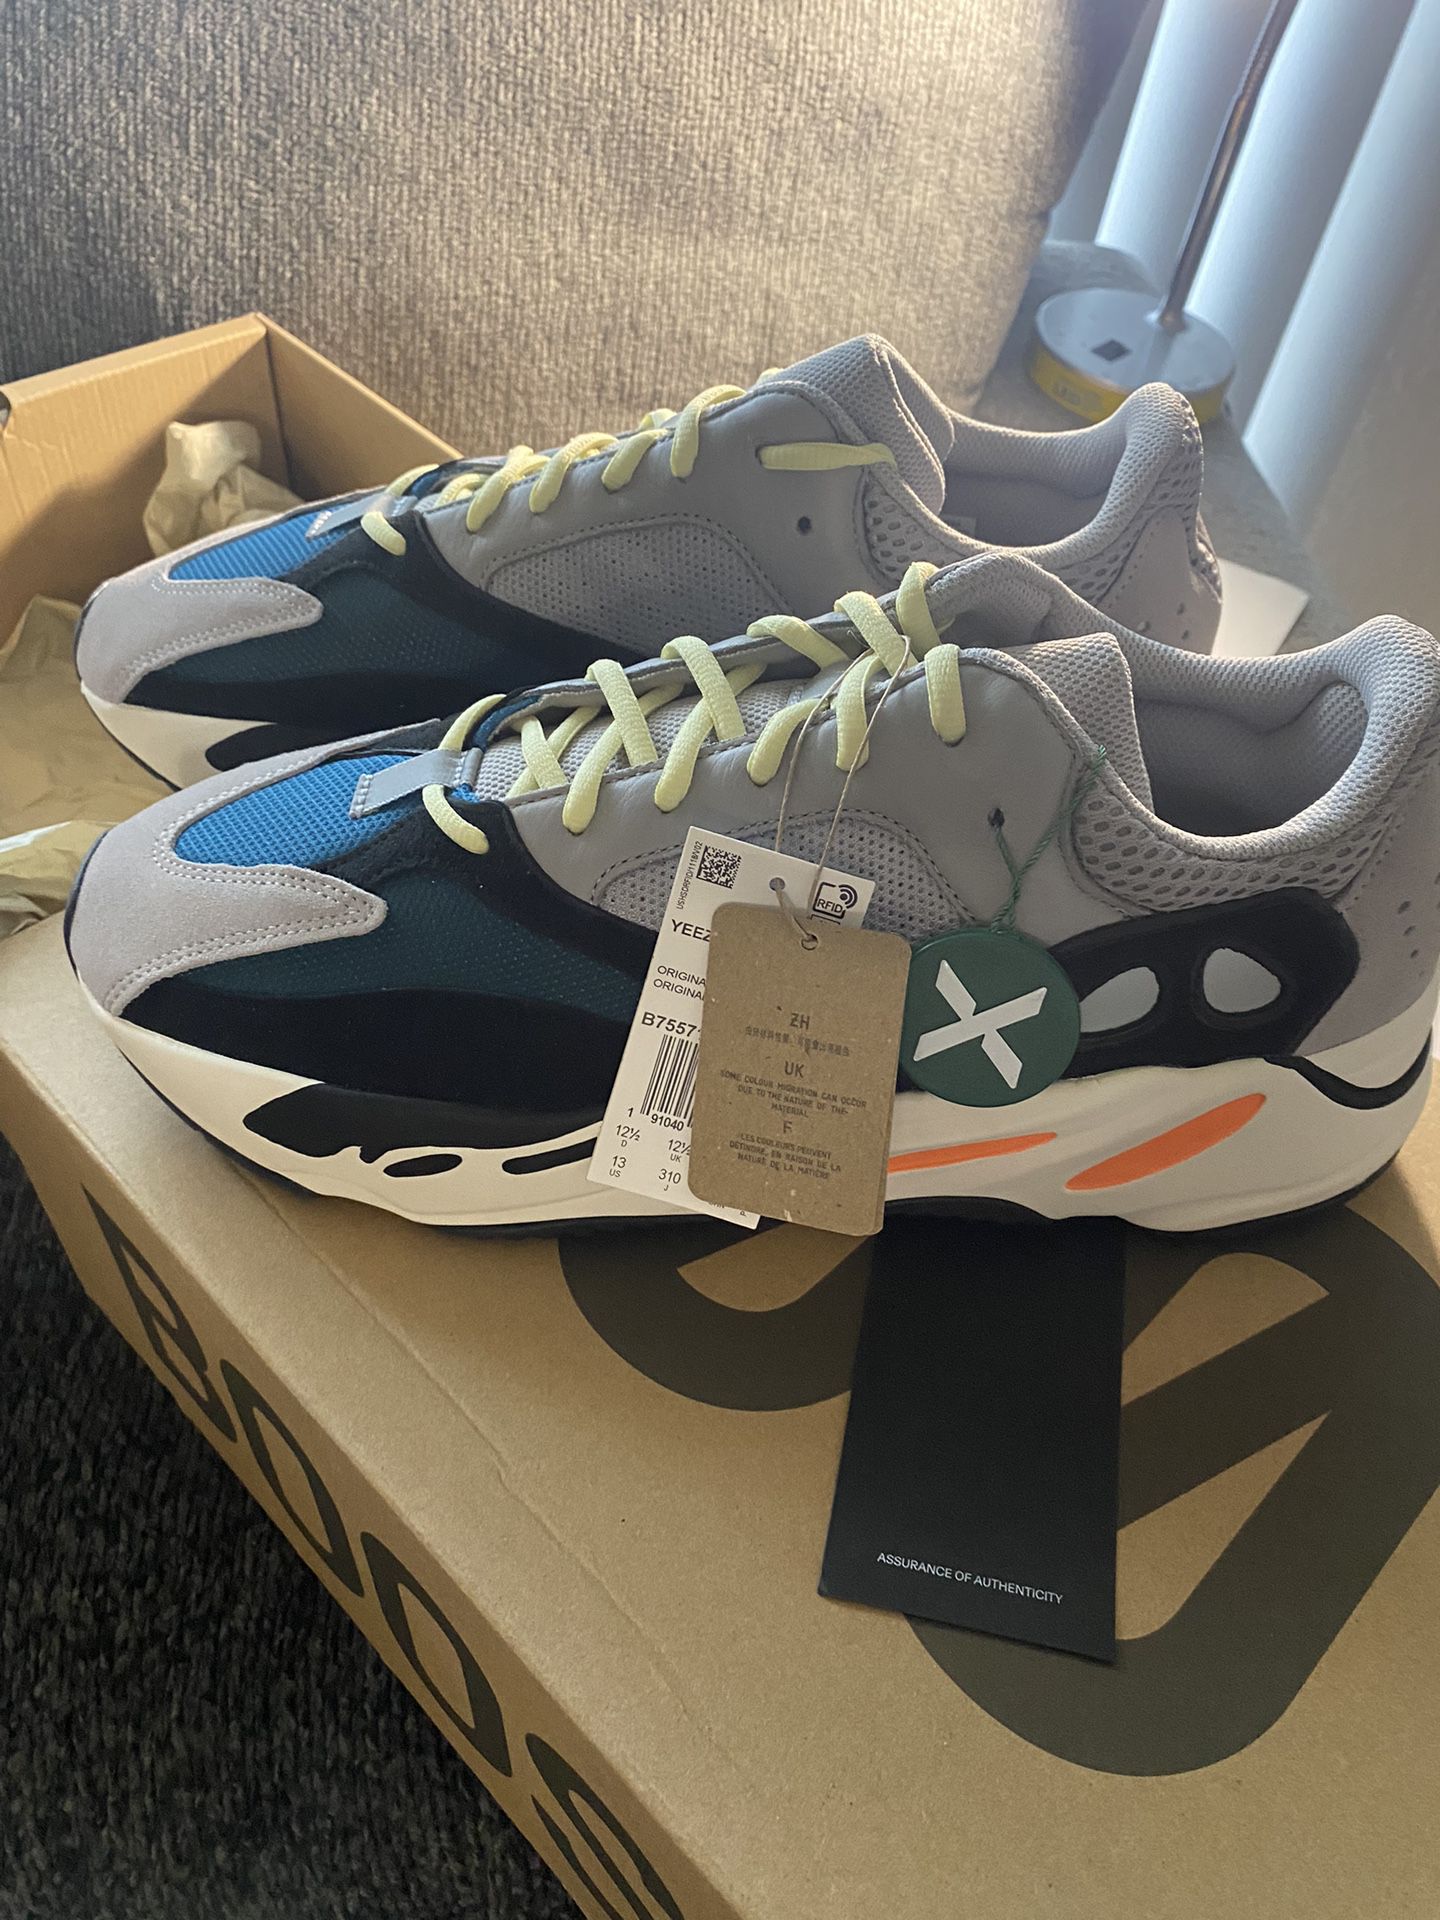 Yeezy 700 Wave Runners (Size 13)